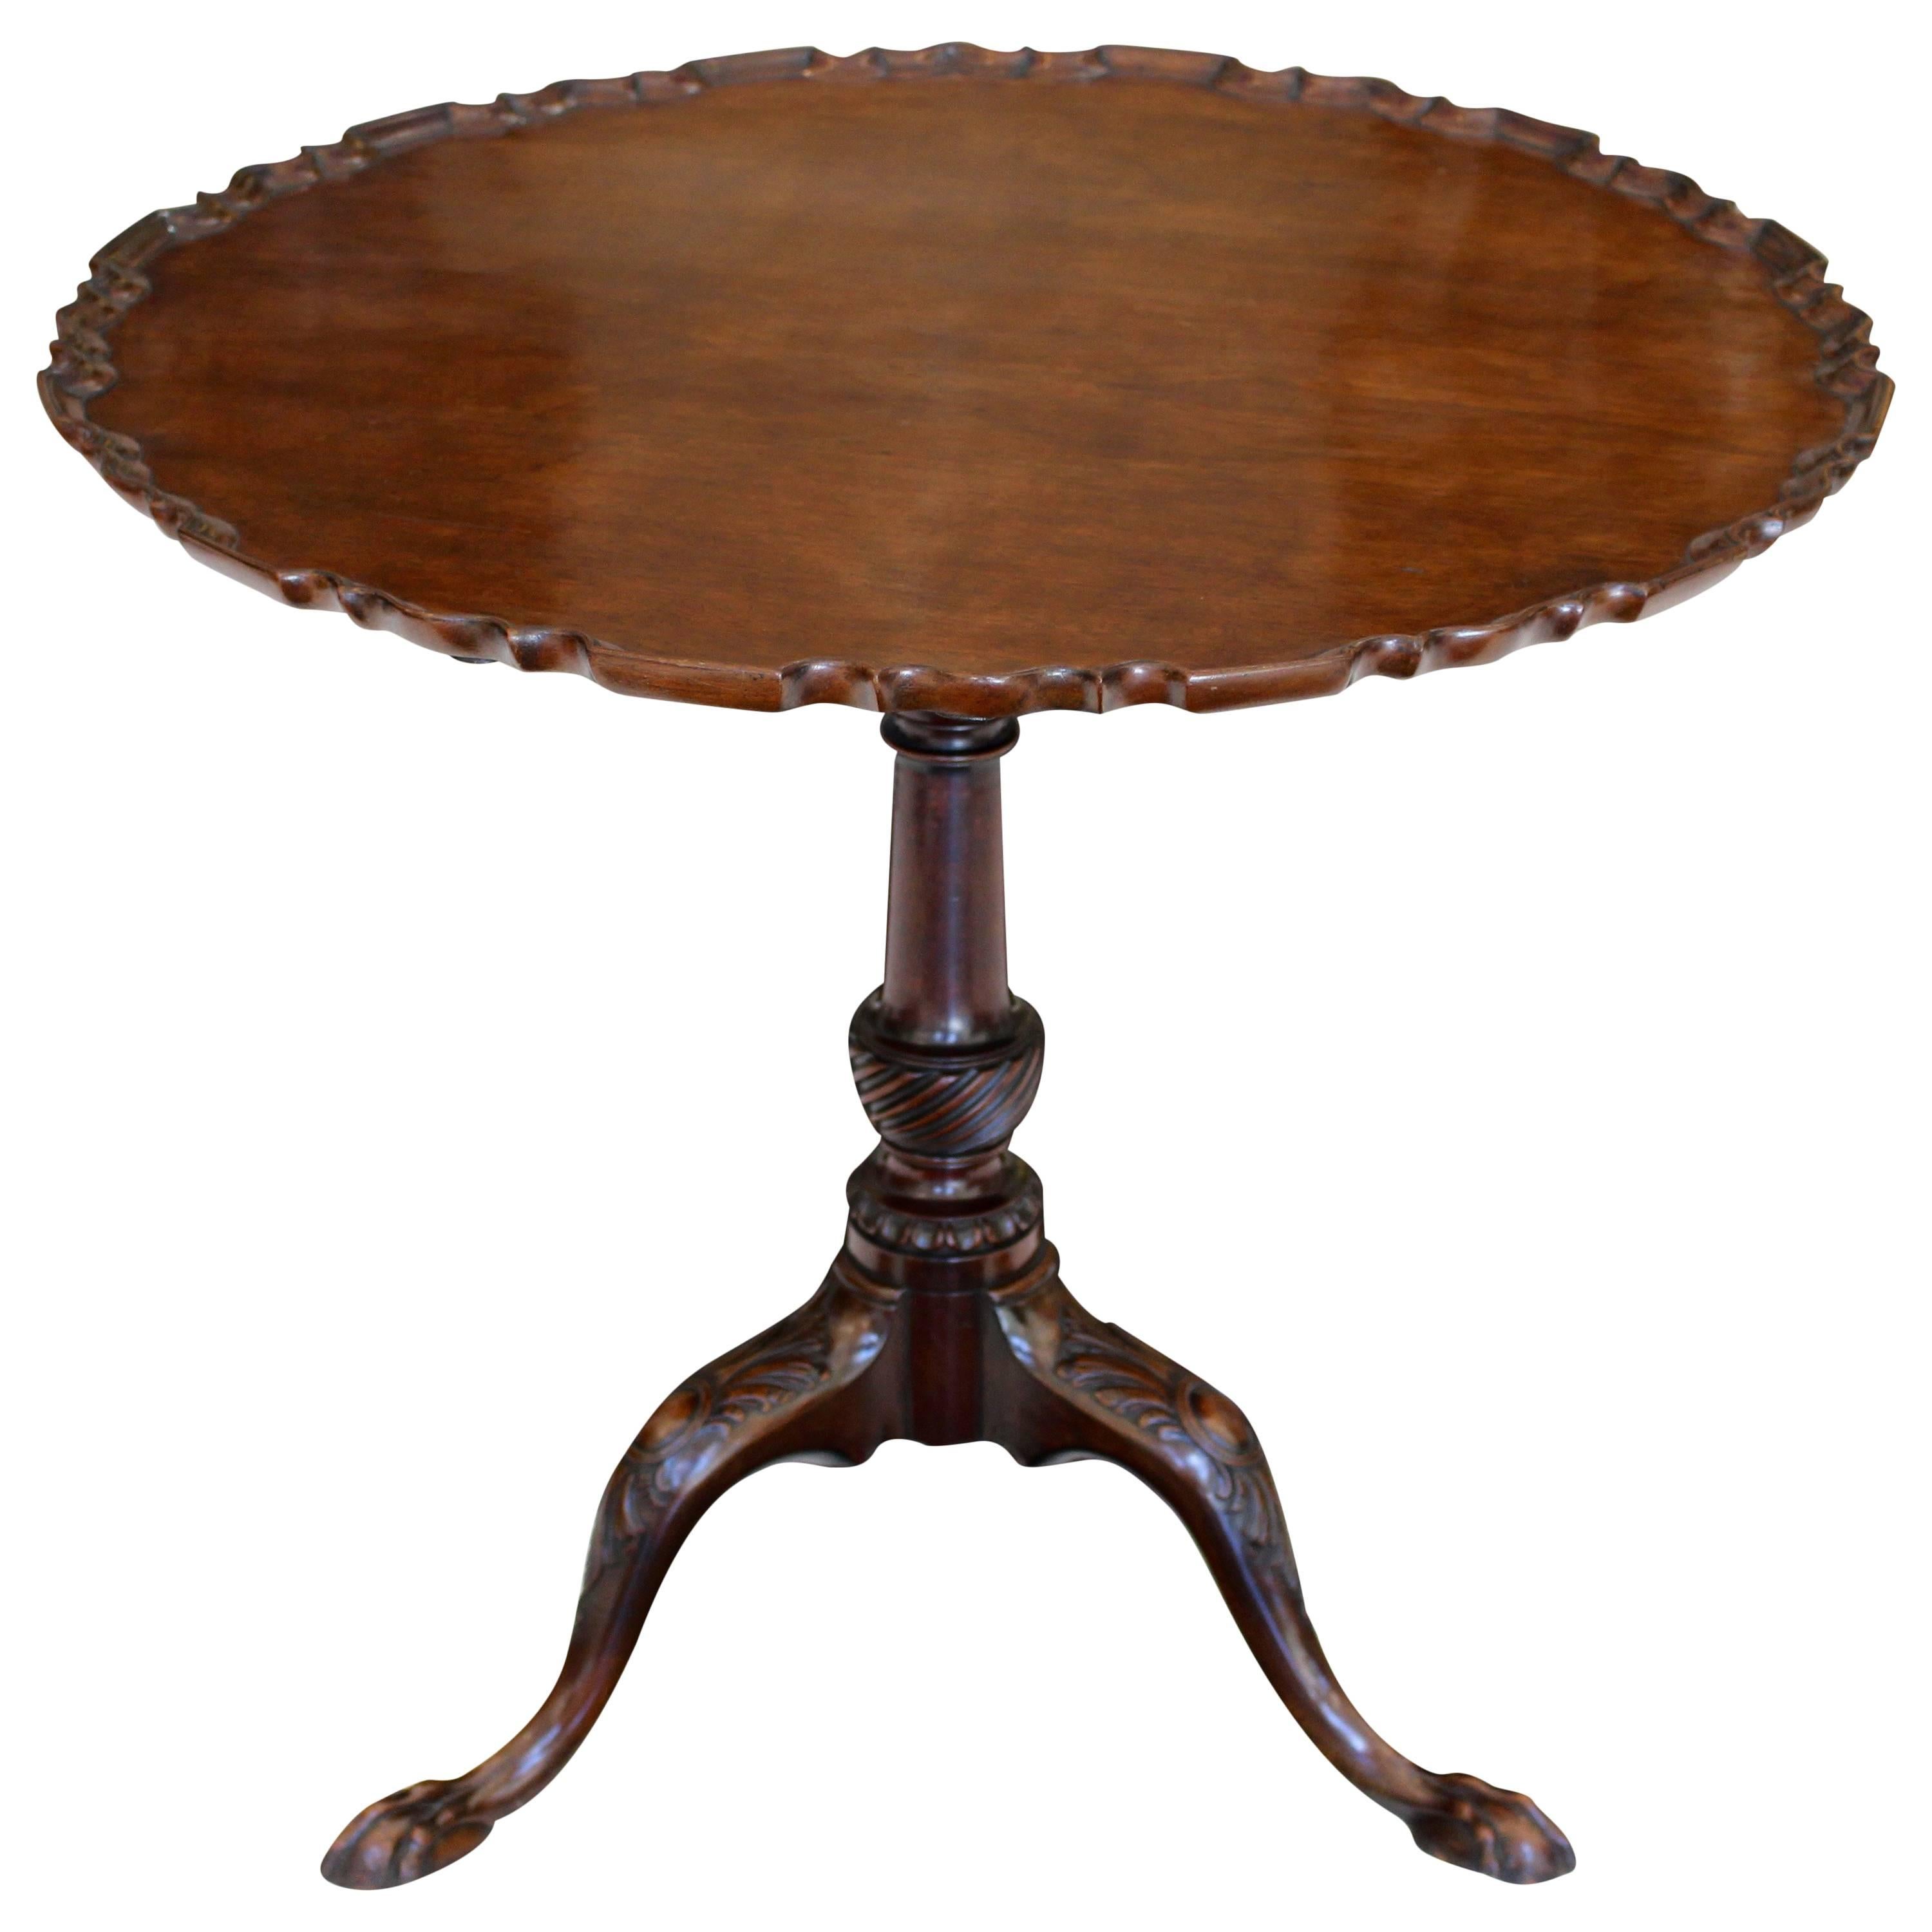 Mid-18th Century English George II Mahogany Tripod Table with Pie-Crust Tilt-Top For Sale